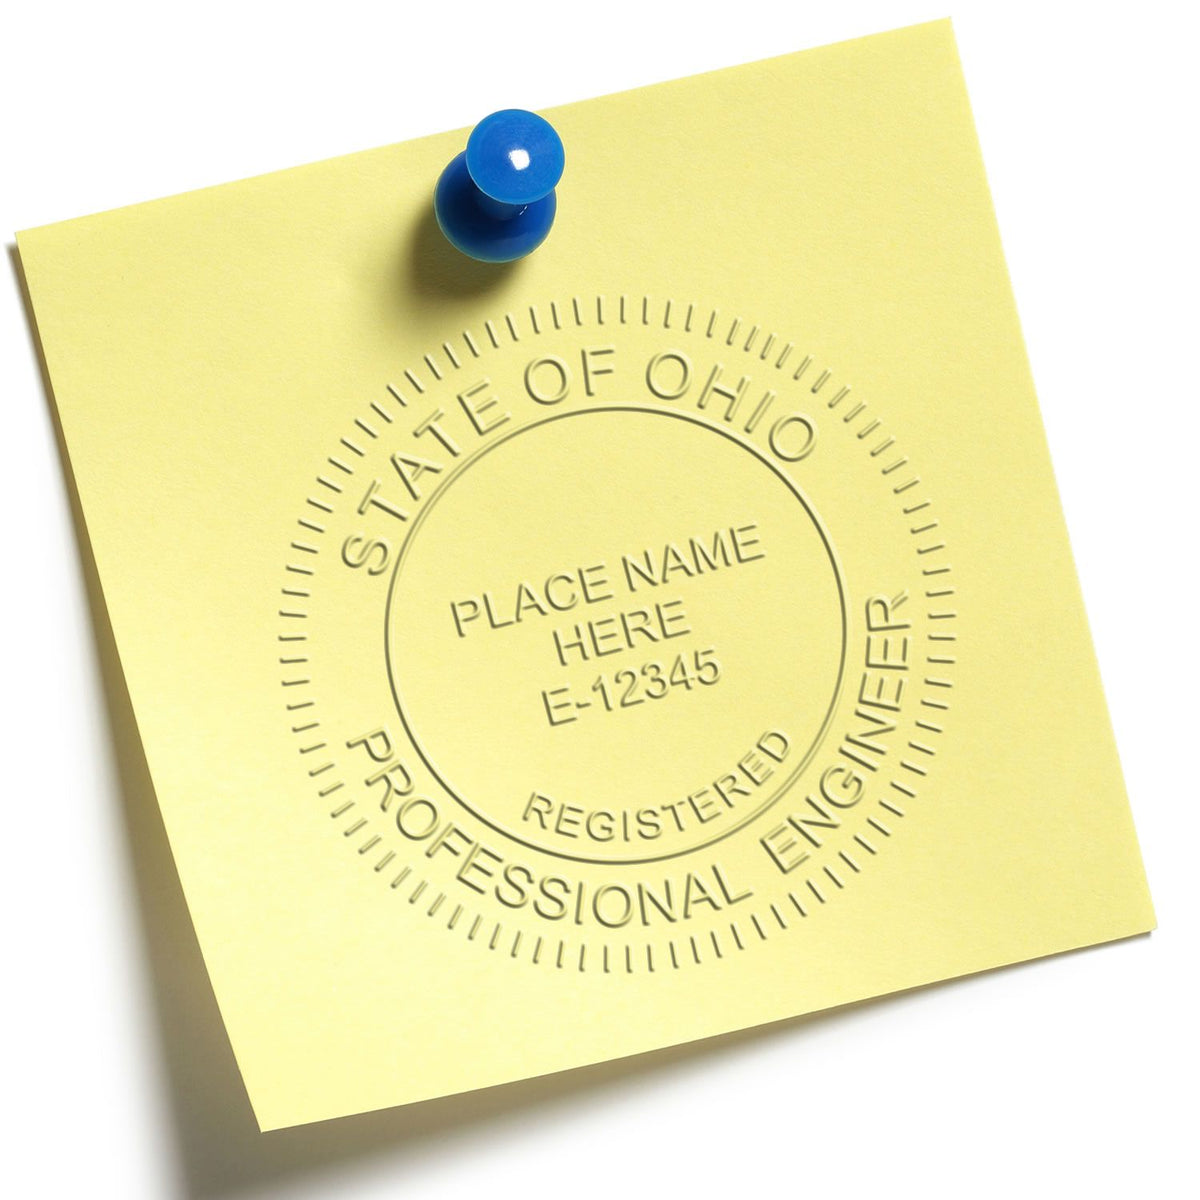 This paper is stamped with a sample imprint of the Soft Ohio Professional Engineer Seal, signifying its quality and reliability.